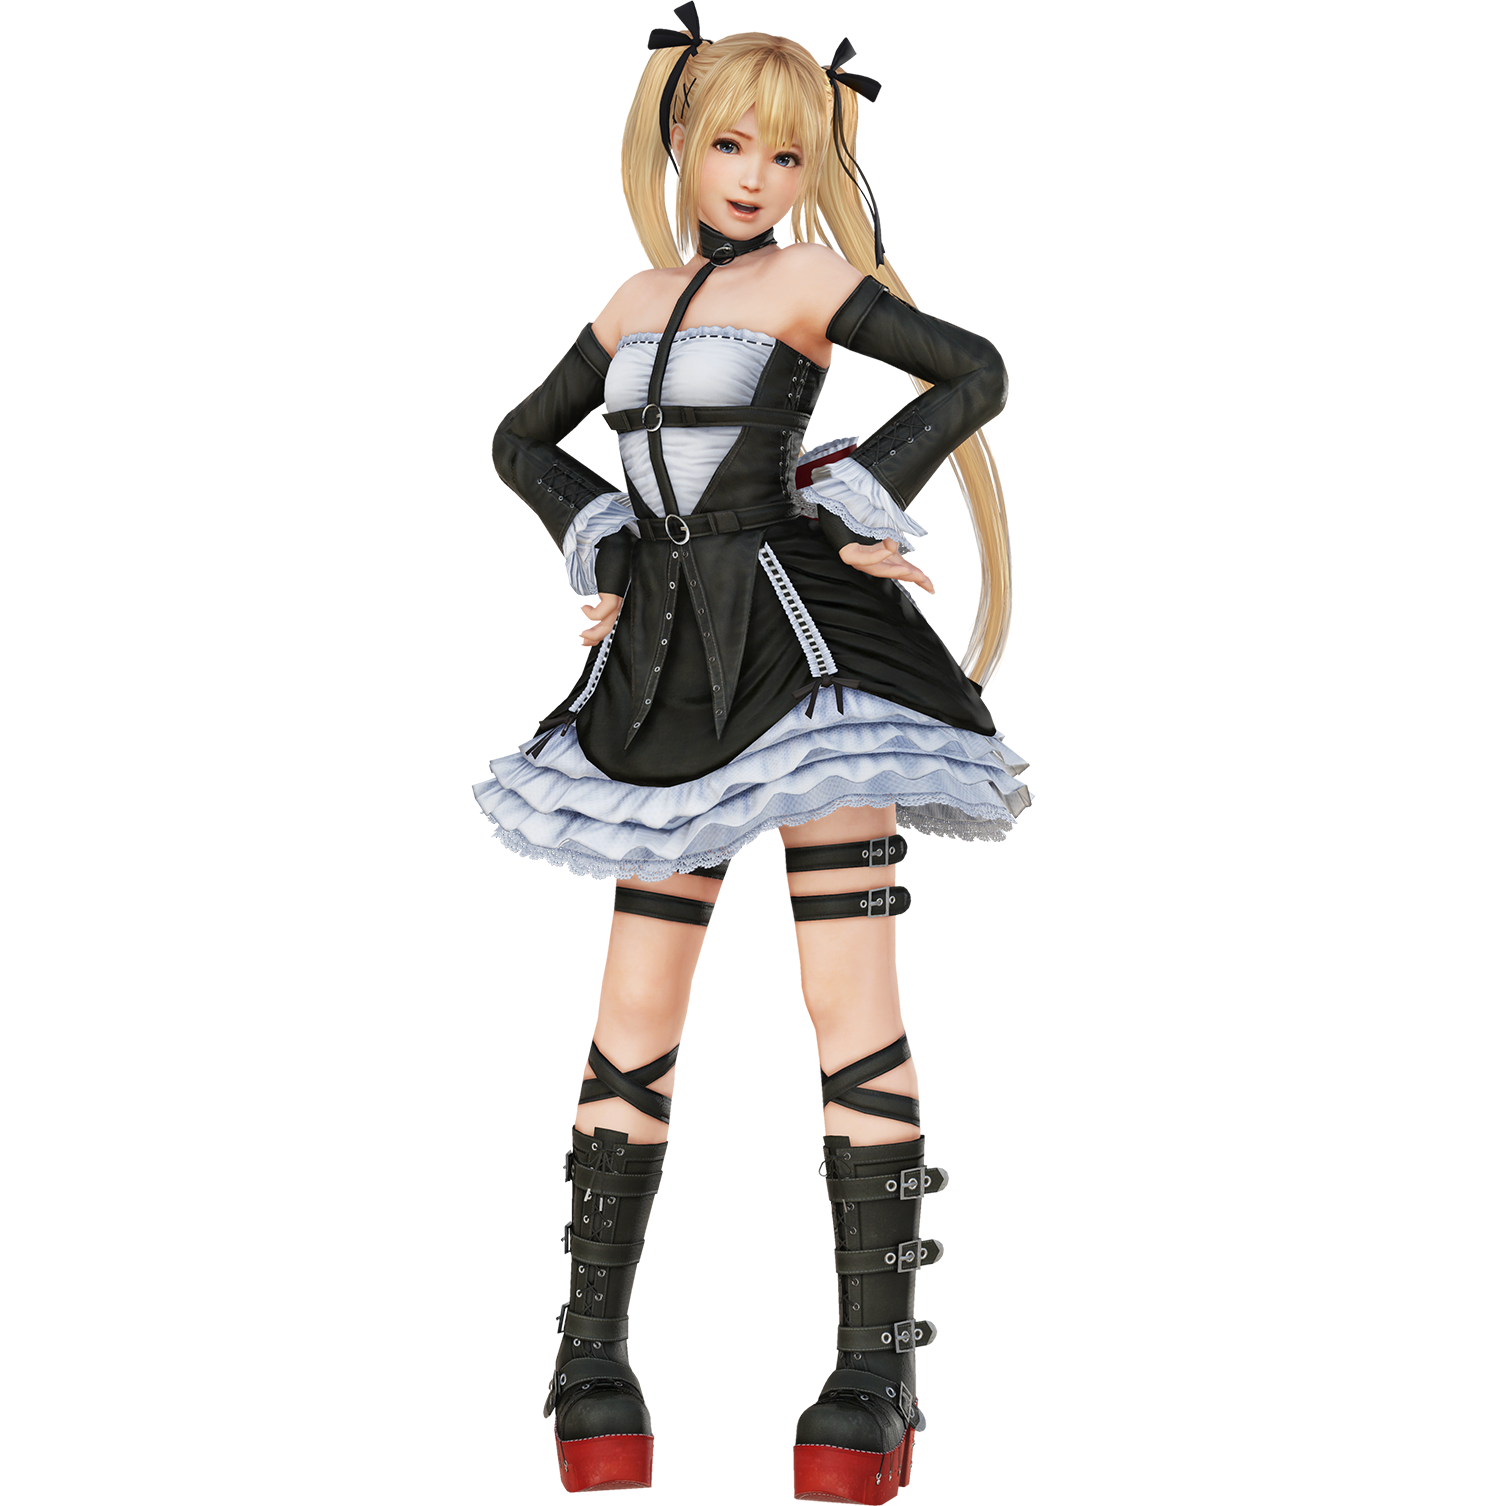 Marie Rose Concept - Dead or Alive by Necriseye on DeviantArt